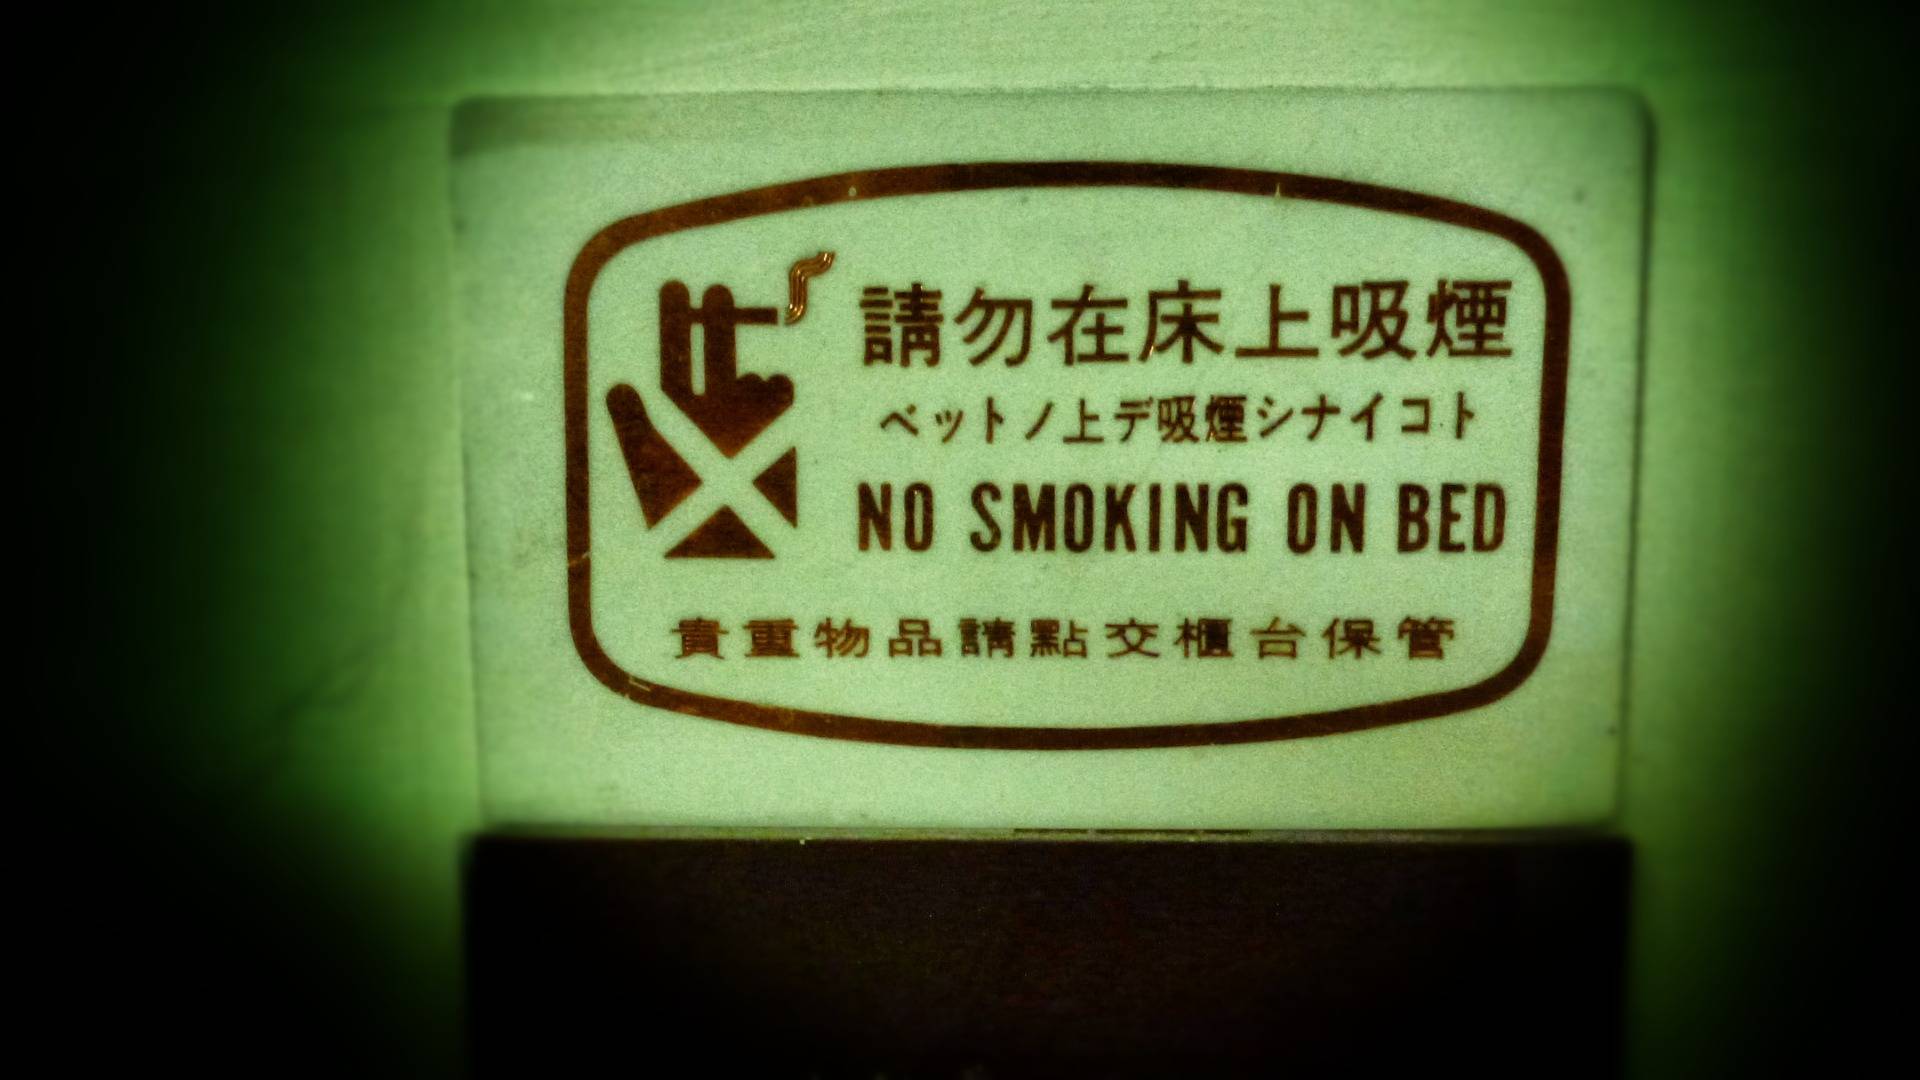 Never forget: No smoking in bed!